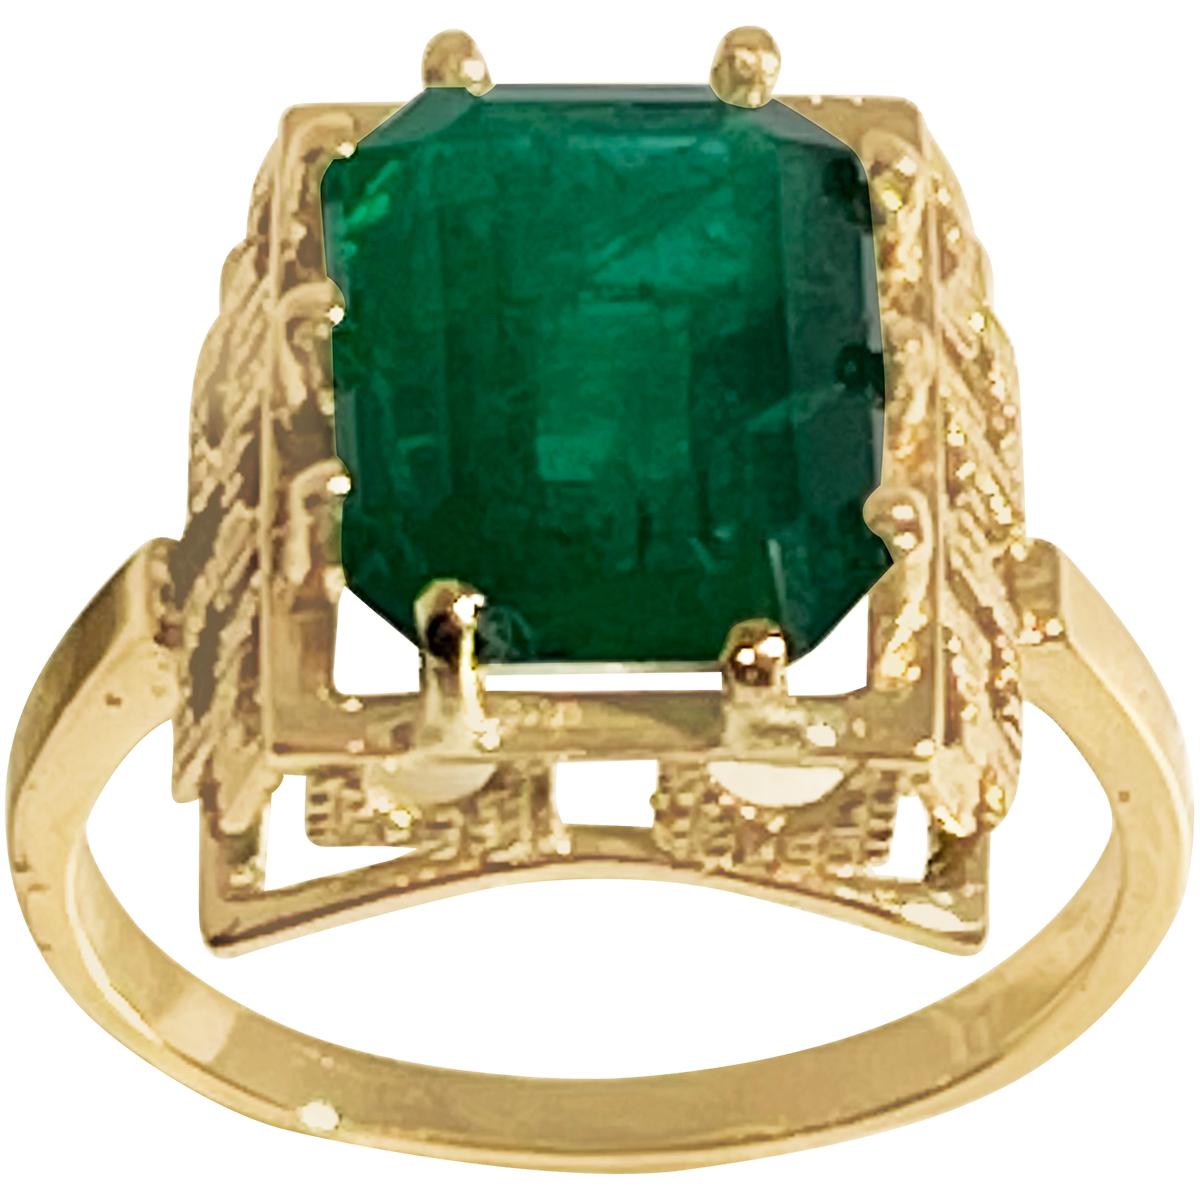 A classic, Cocktail ring 
10X12 Emerald  cut Emerald  Ring 14 Karat Yellow Gold Size 6.2
Emerald cut emerald is the most popular and in demand  Emerald 
Large size Emerald cut Emerald Intense green color with lots of shine and brilliance but has